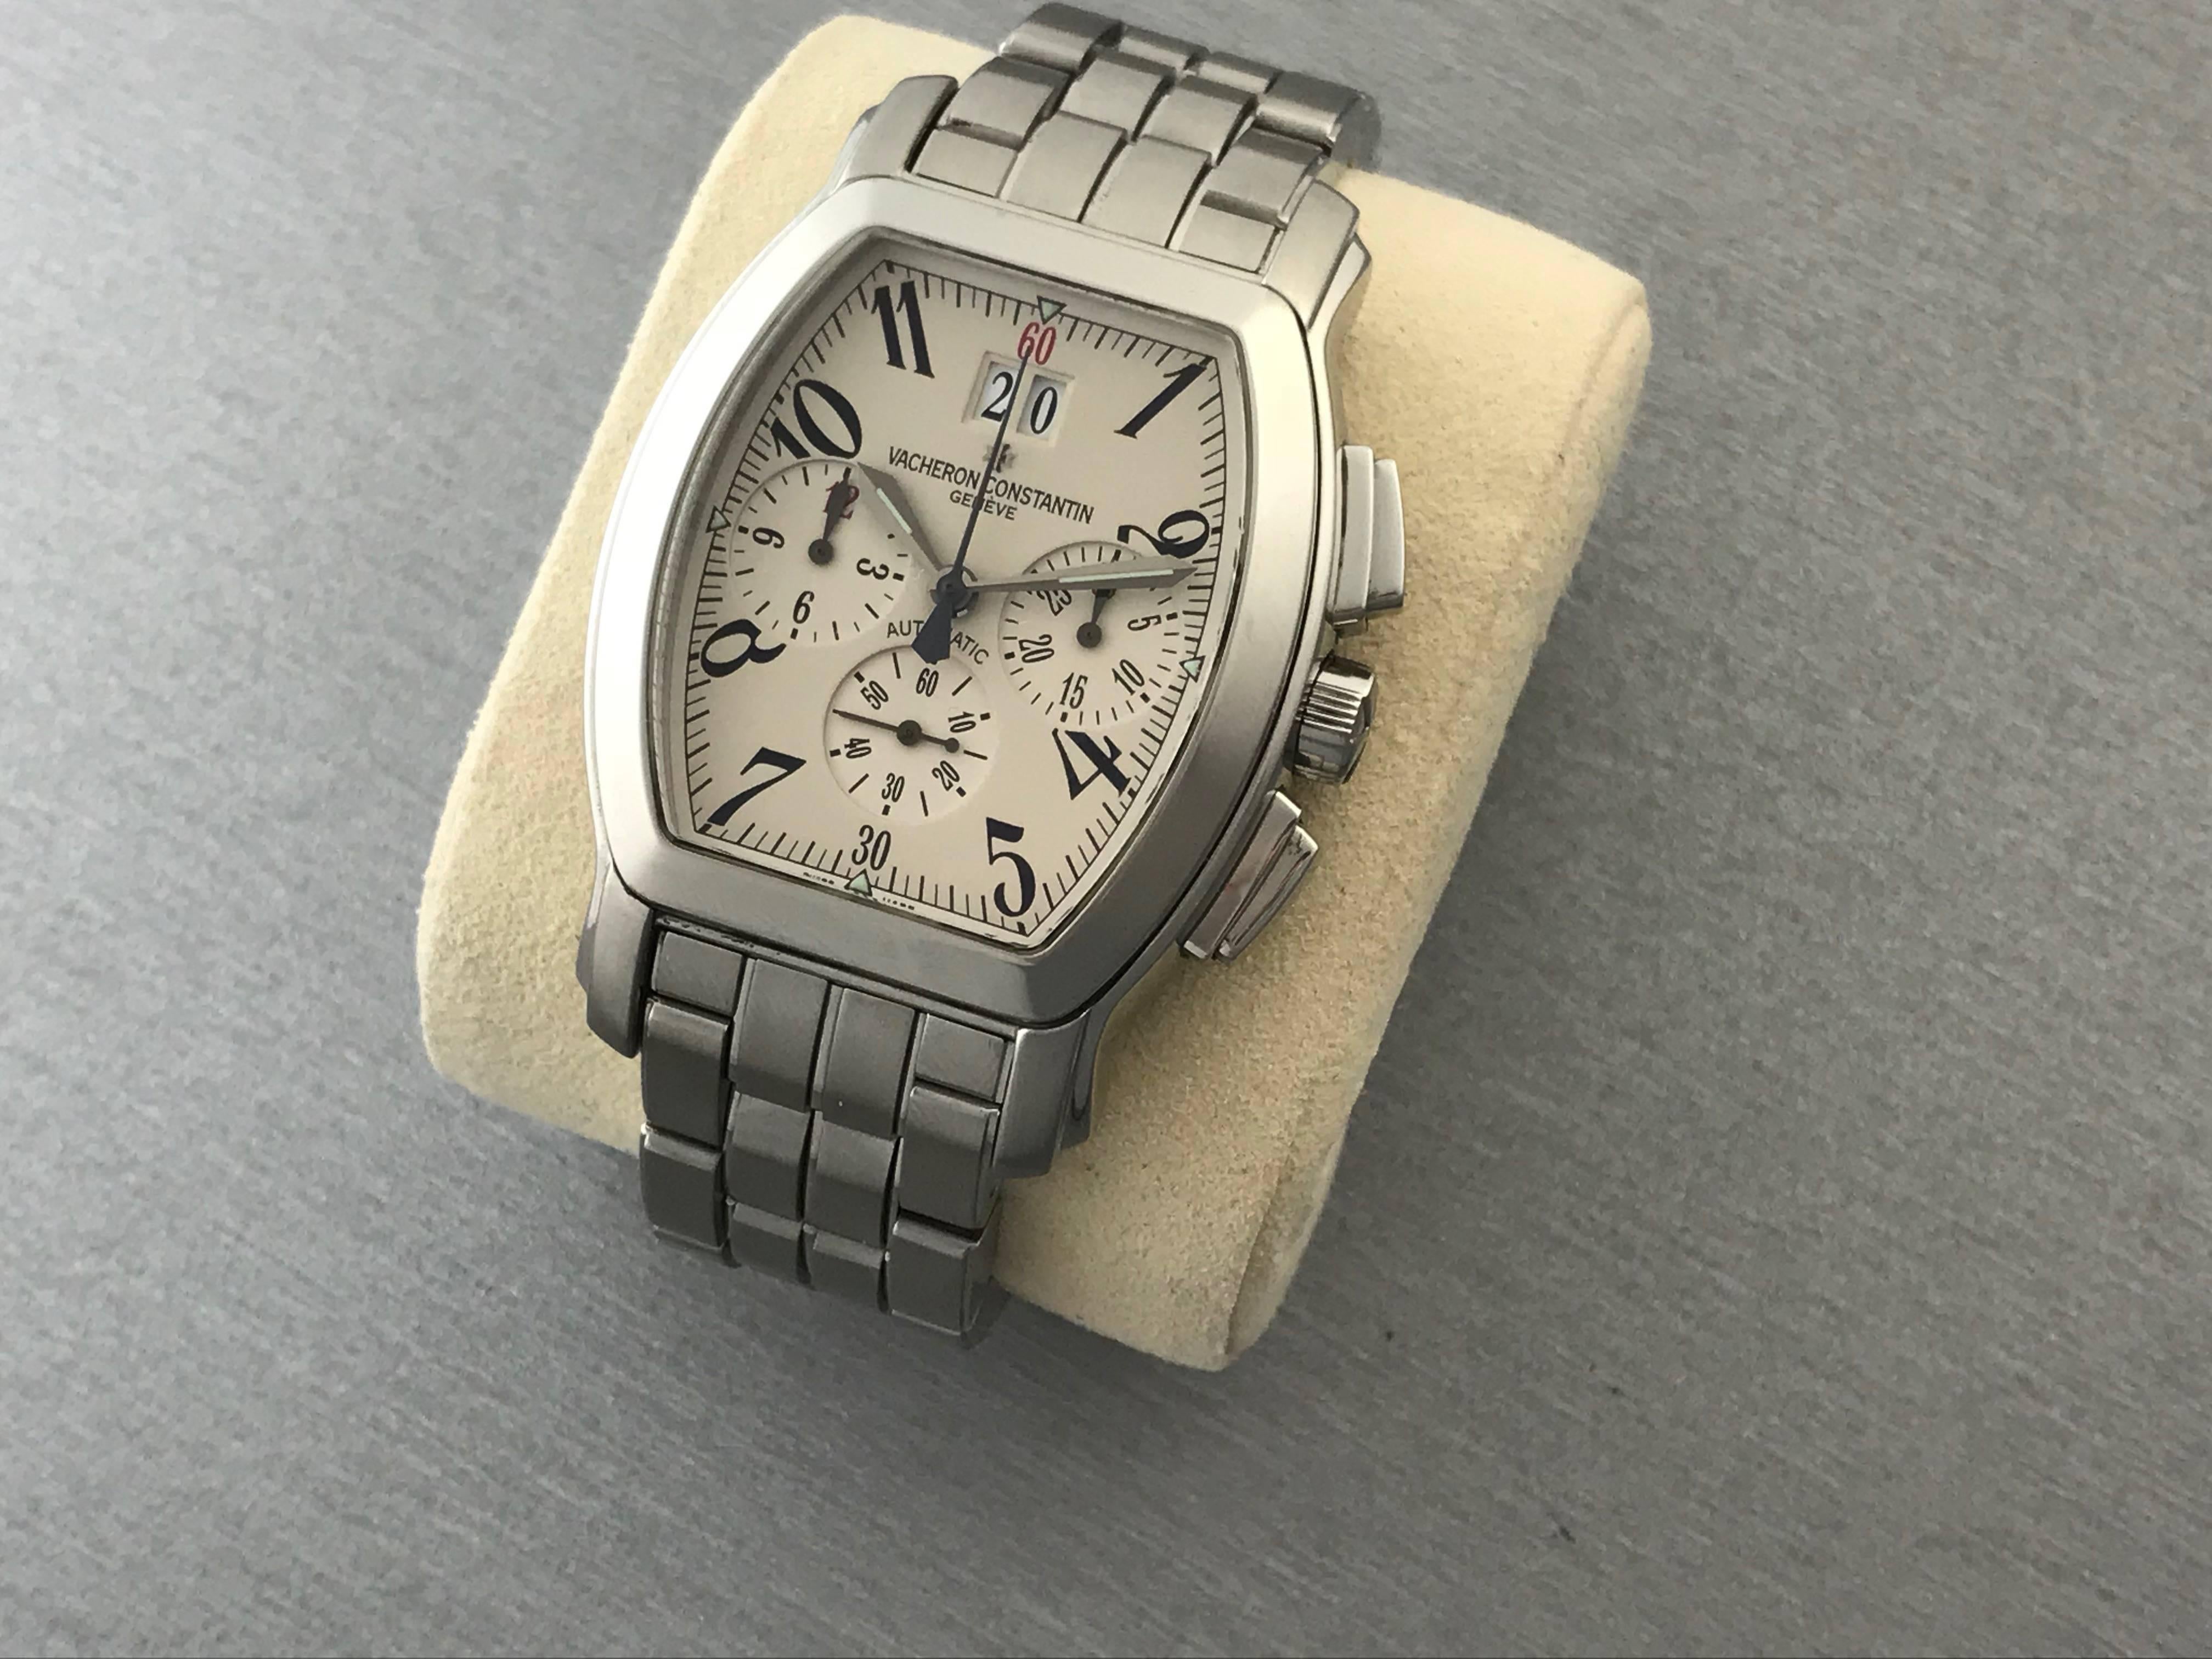 Contemporary Vacheron Constantin Royal Eagle Stainless Steel Chronograph Automatic Wristwatch